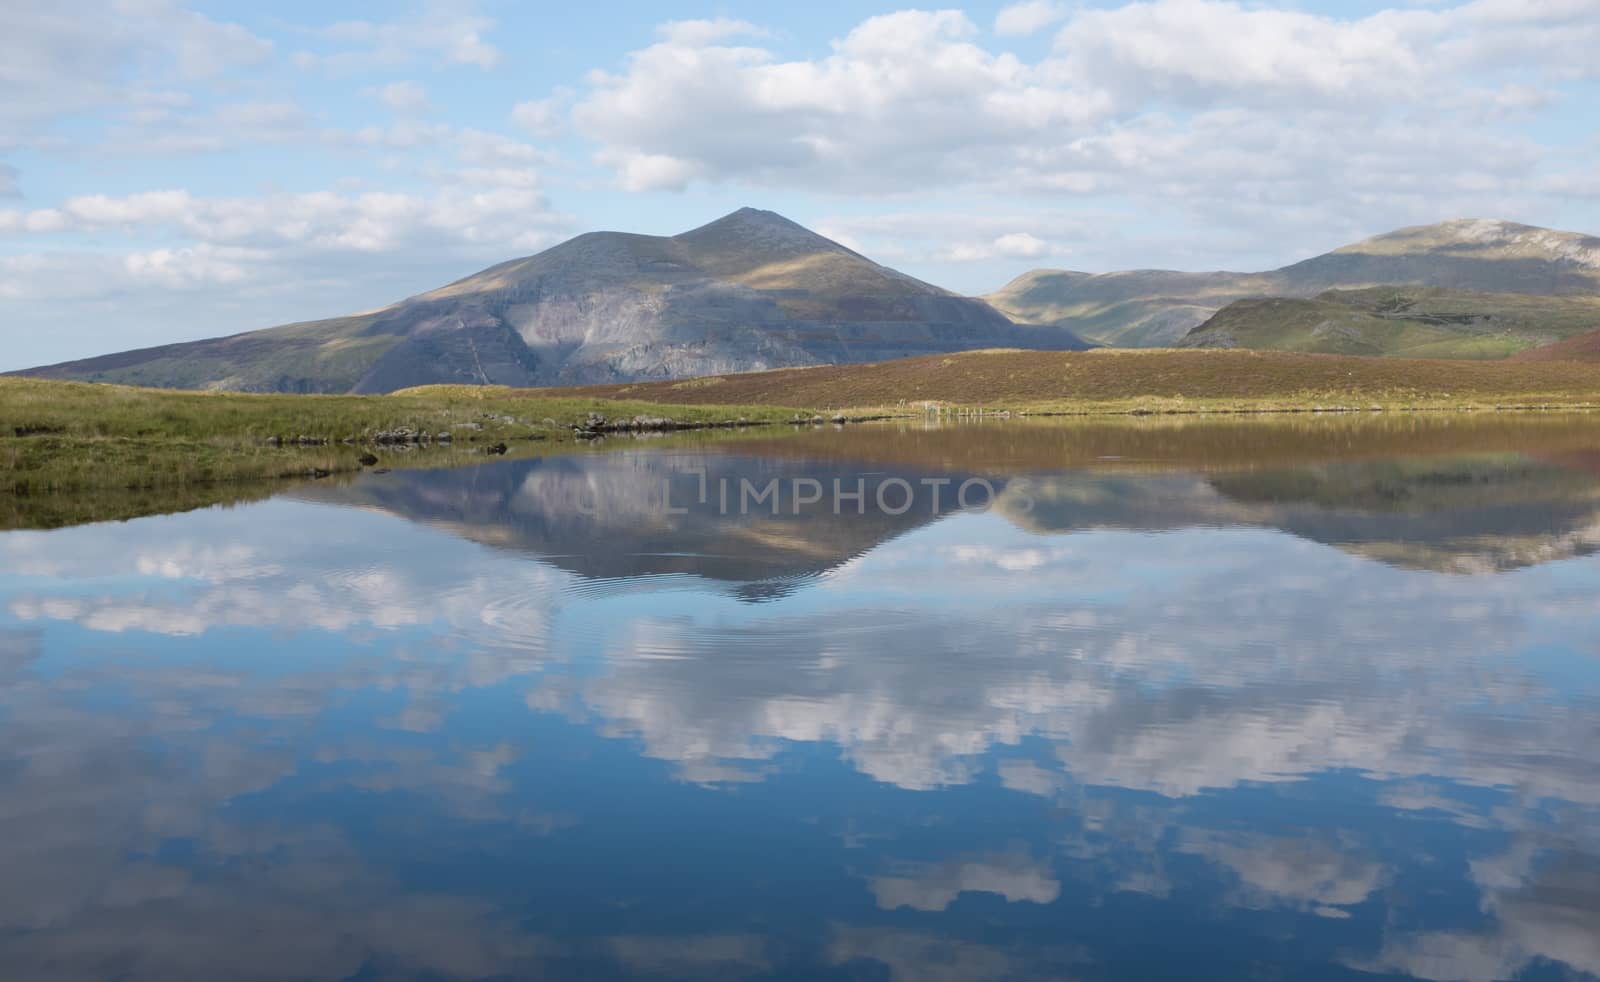 Llyn Dwythwch with the reflections of the sky and the mountains Elidir fawr and Y garn, Snowdonia national park, Wales, UK.